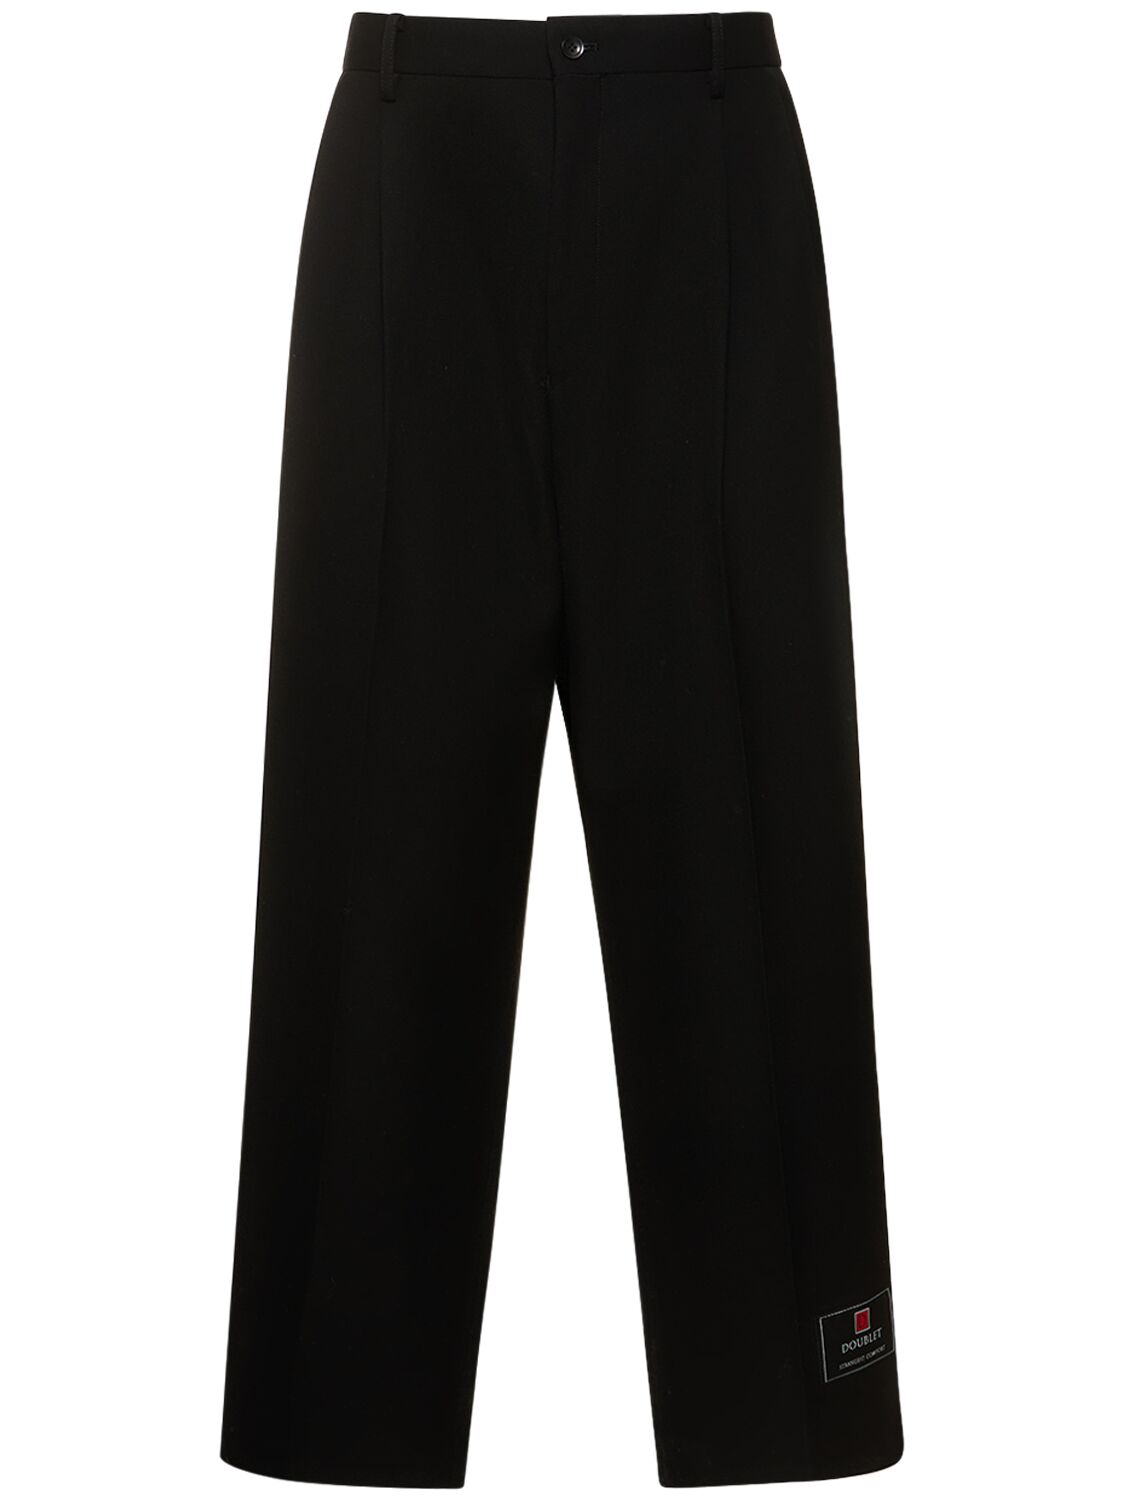 Image of Tailored Wool Pants